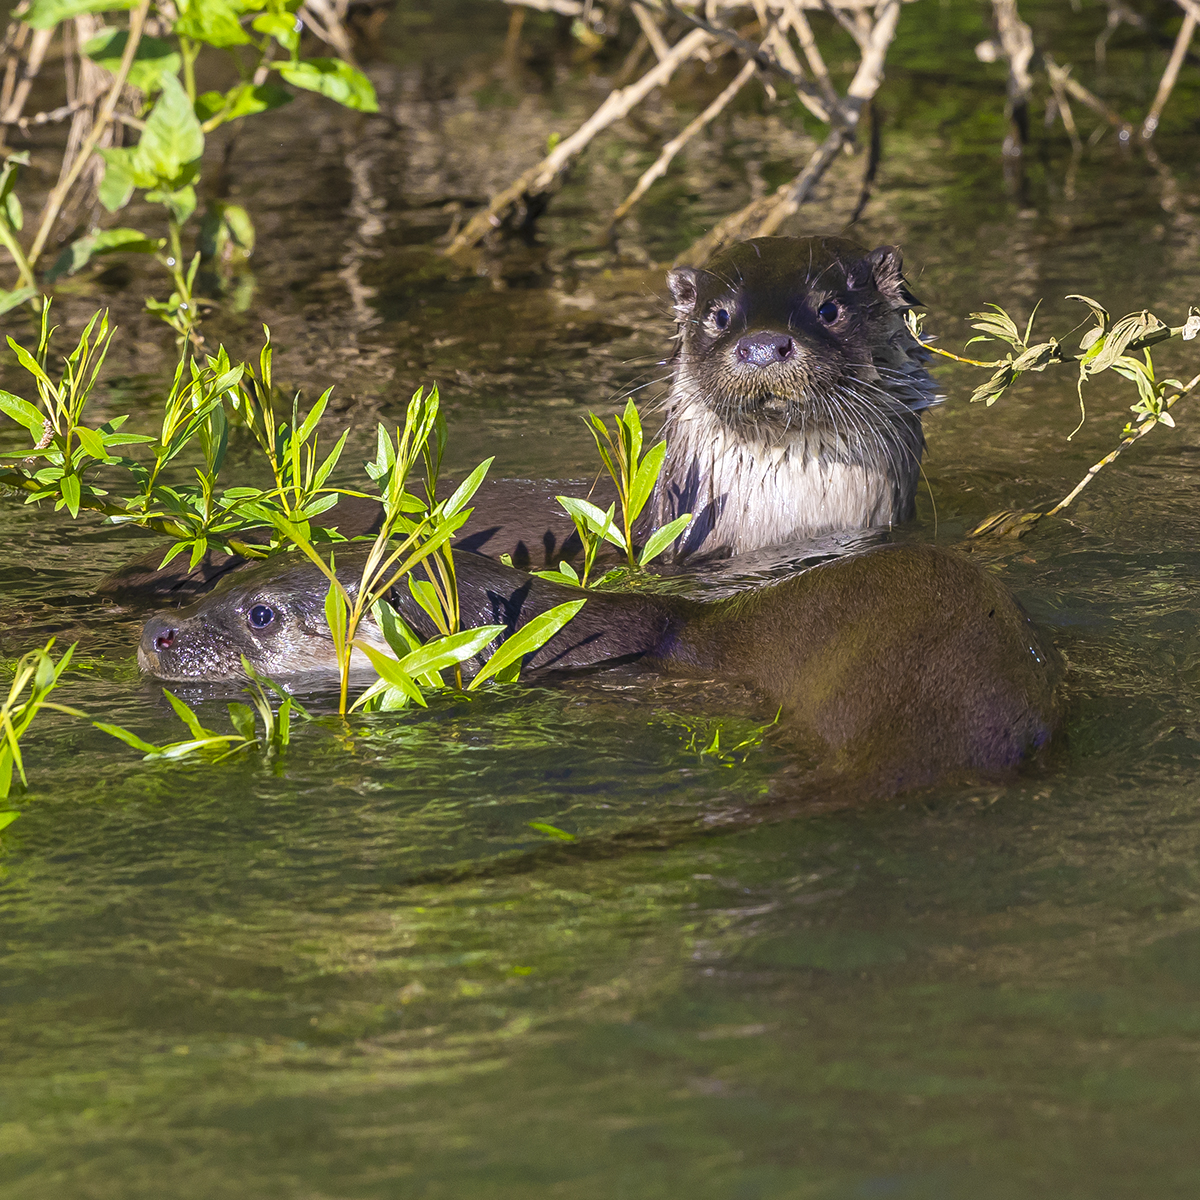 These young Otters were very entertaining at the weekend, on my patch. More on justwildimages.blogspot.com

#Otters #NatureMagic #WellandWildlife #WildlifeEncounters #NatureLovers #ResilientSpecies #RiverLife #WildlifePhotography #NatureAdventures #ExploreNature #NatureConservation